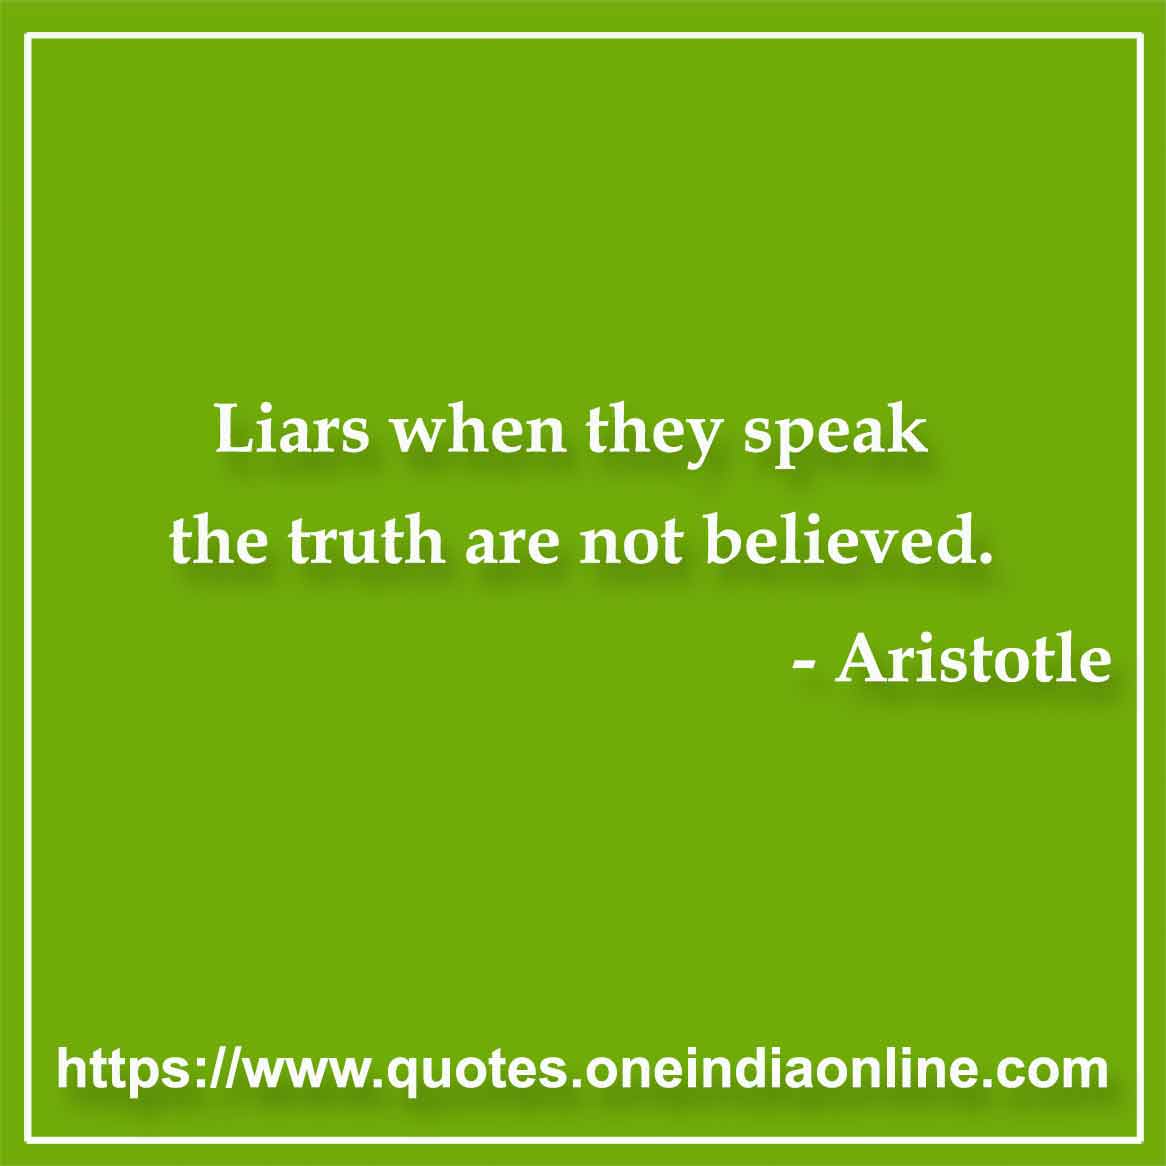 Liars when they speak the truth are not believed.

- Lies Quotes by Aristotle